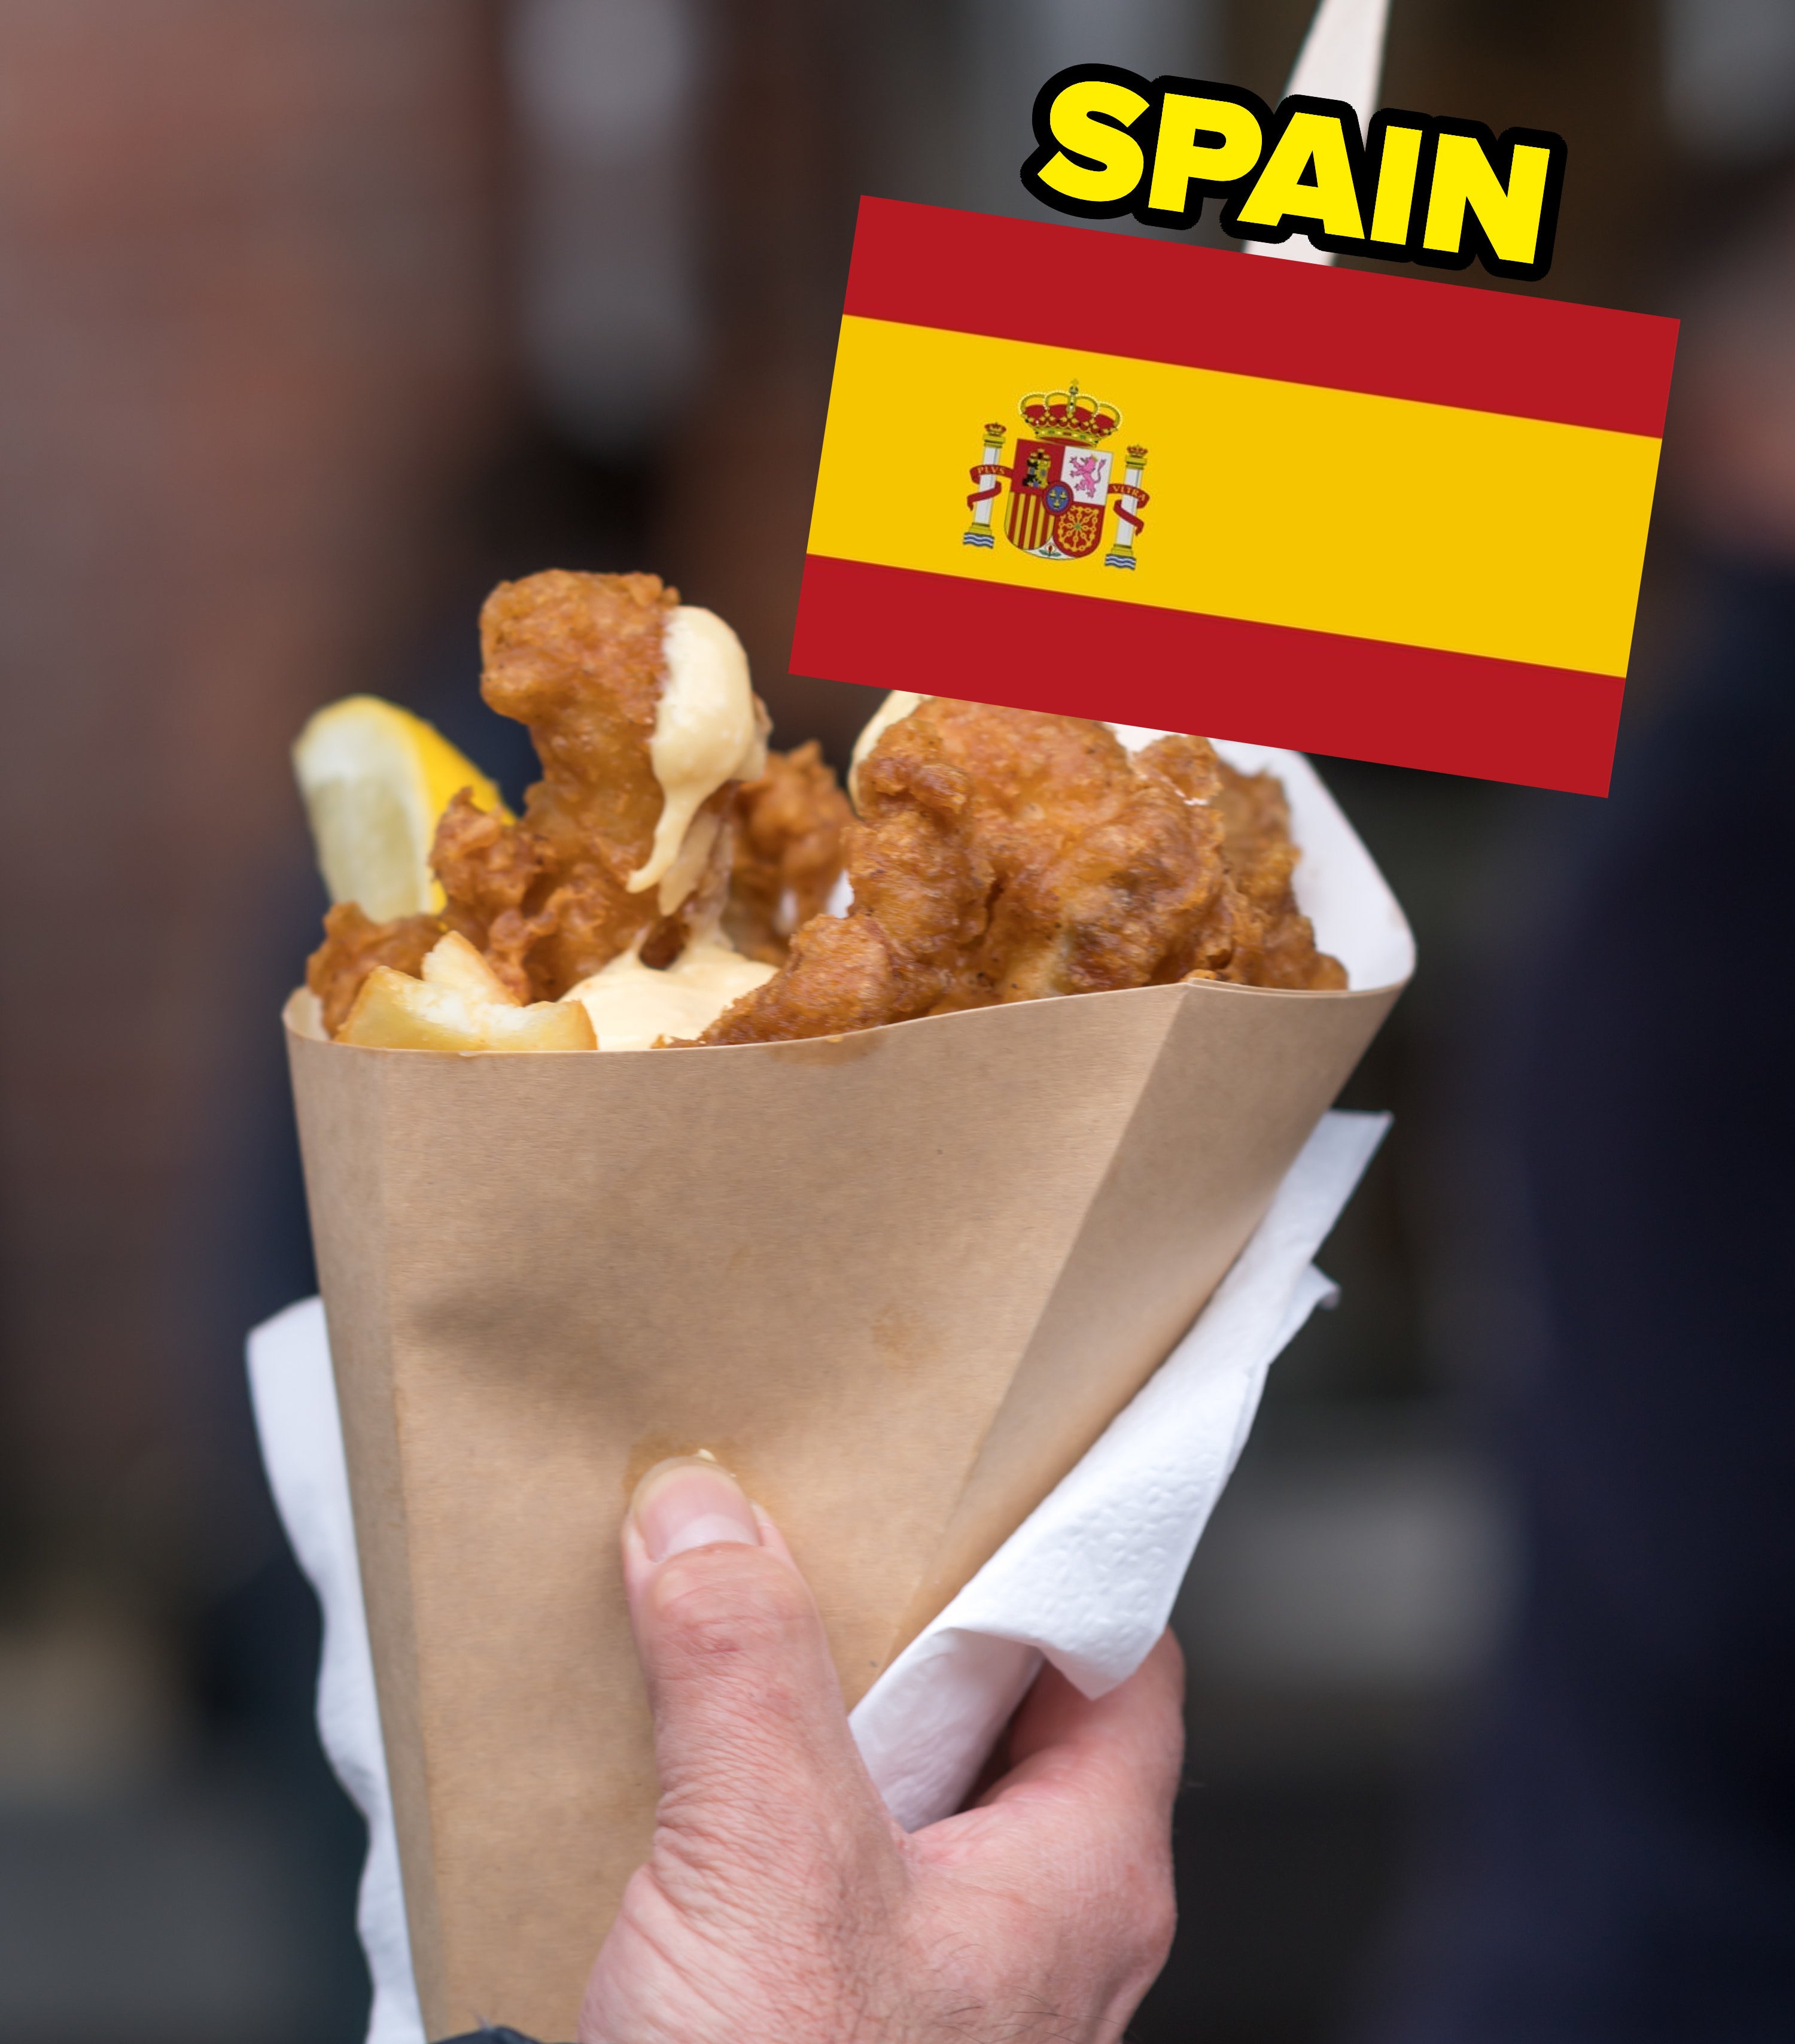 a person holding fried fish with a Spanish flag image